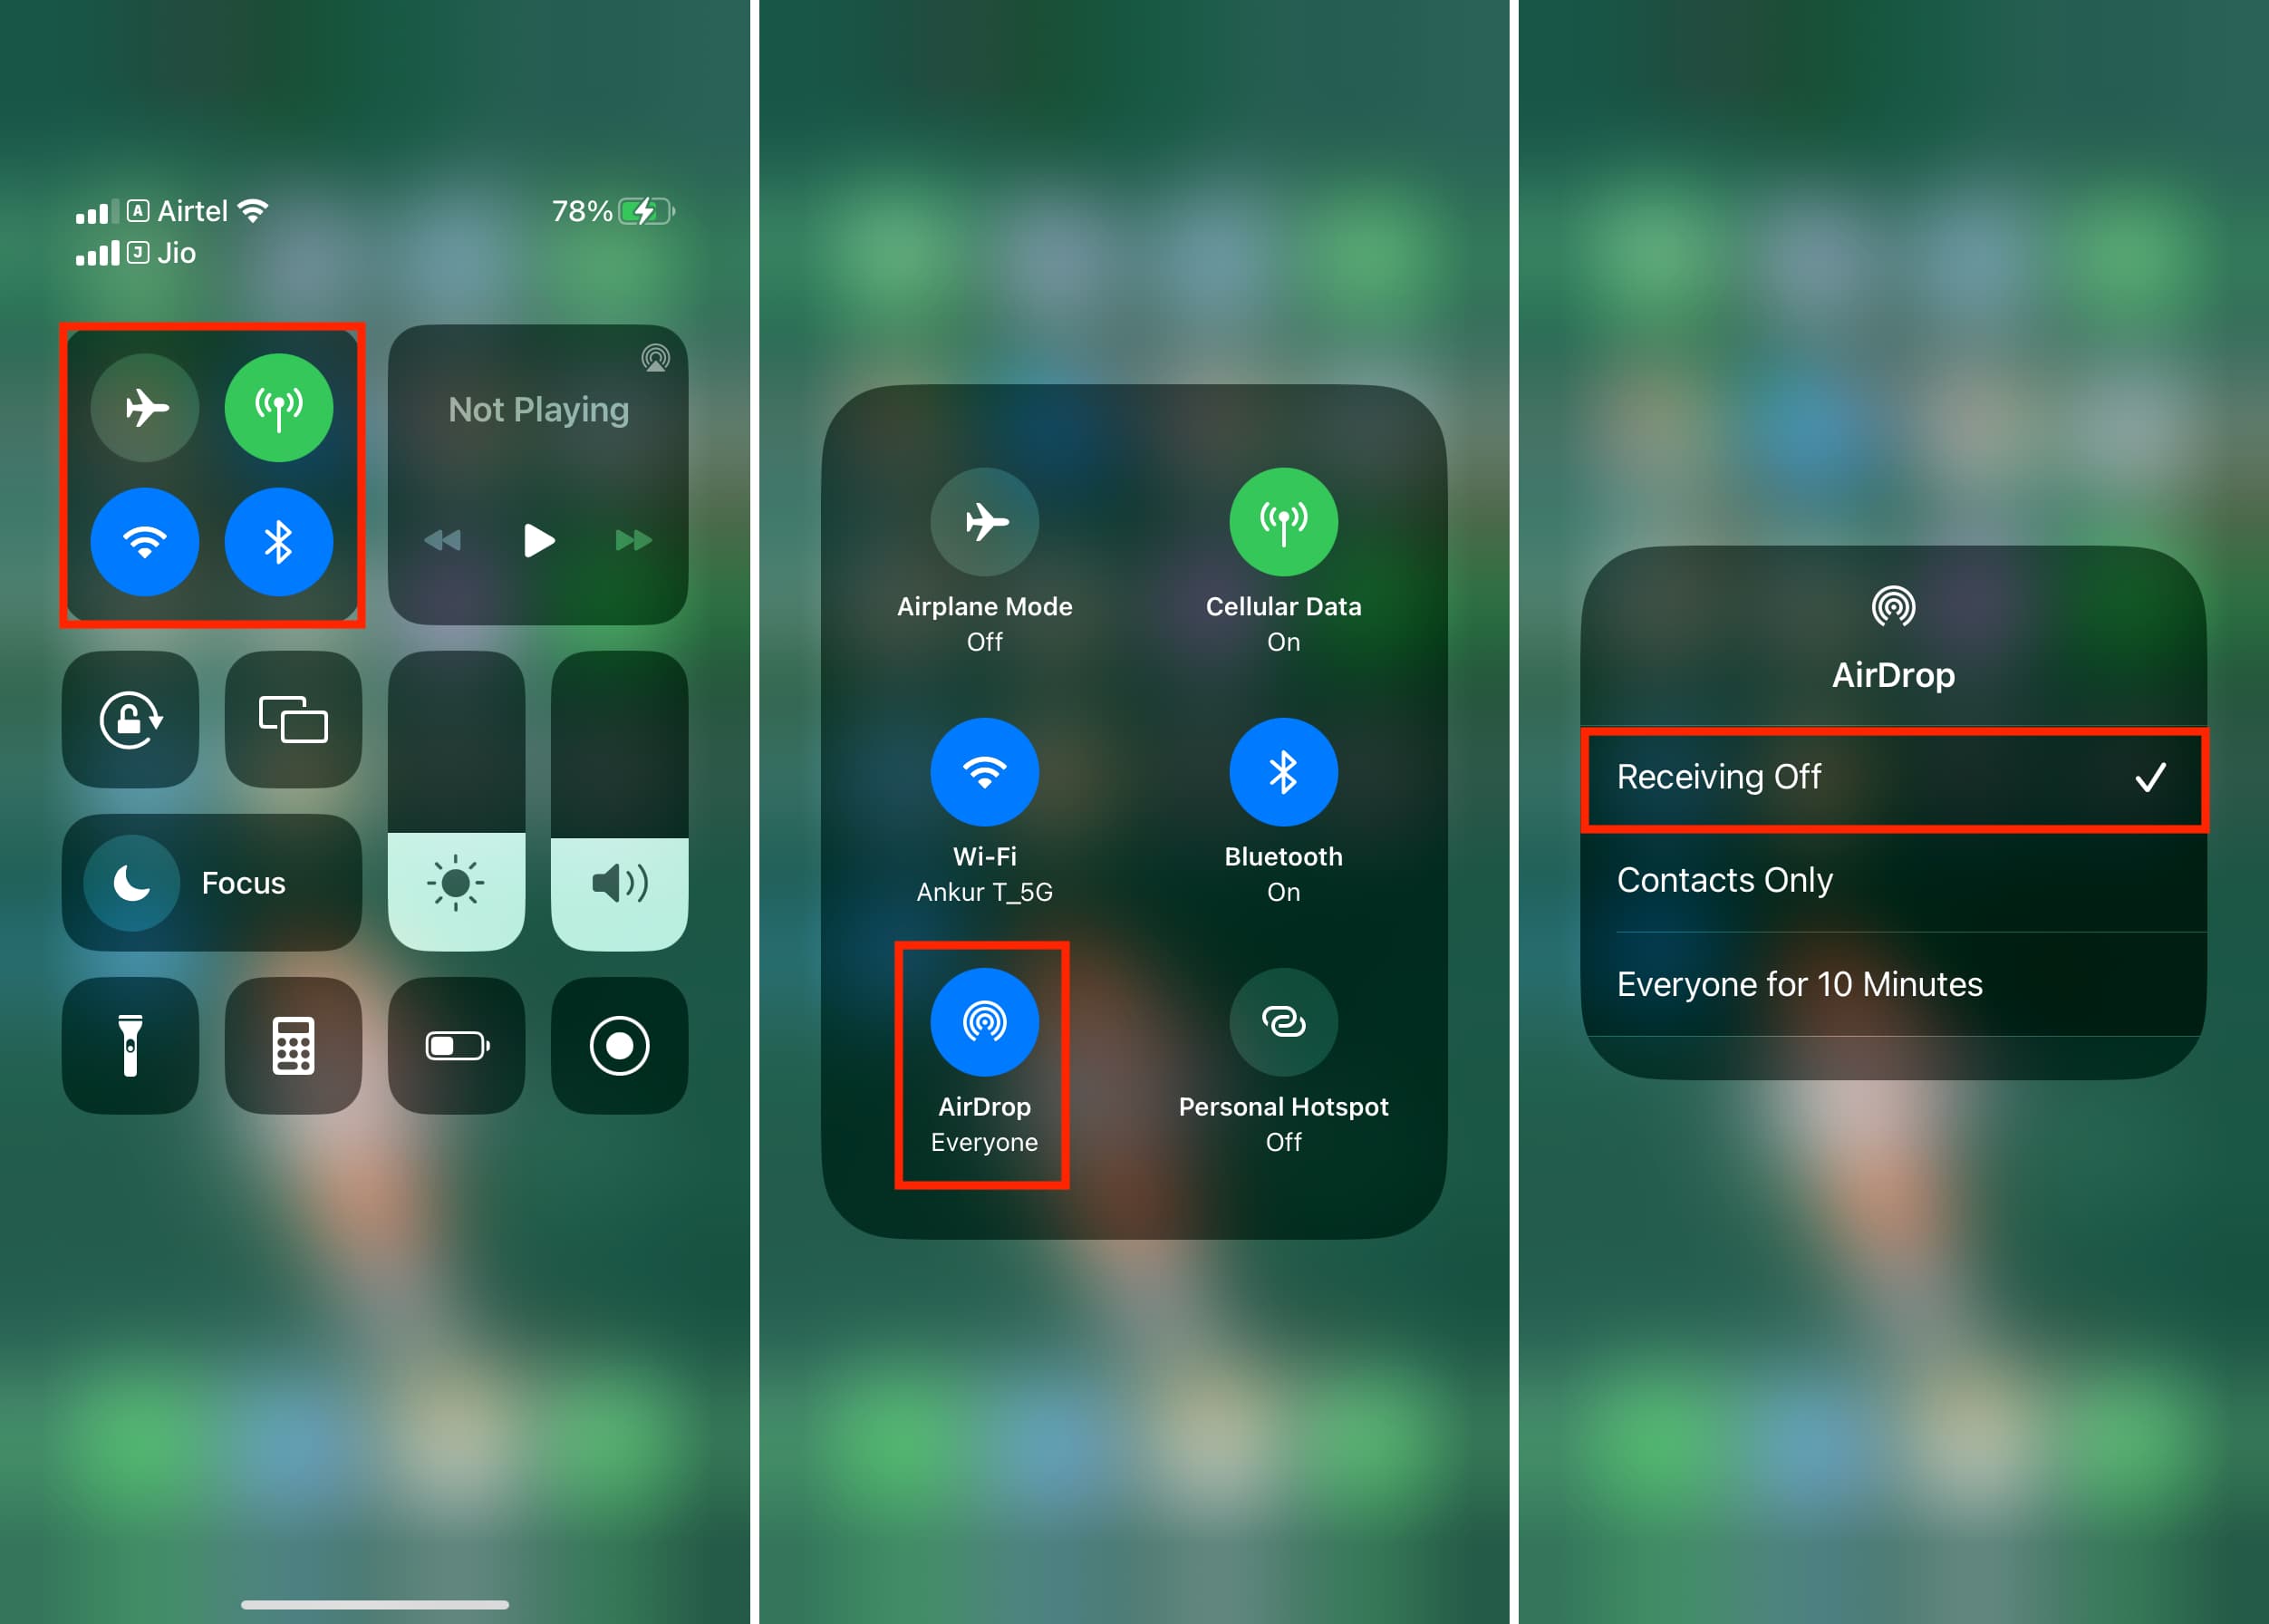 Turn off AirDrop from iPhone Control Center